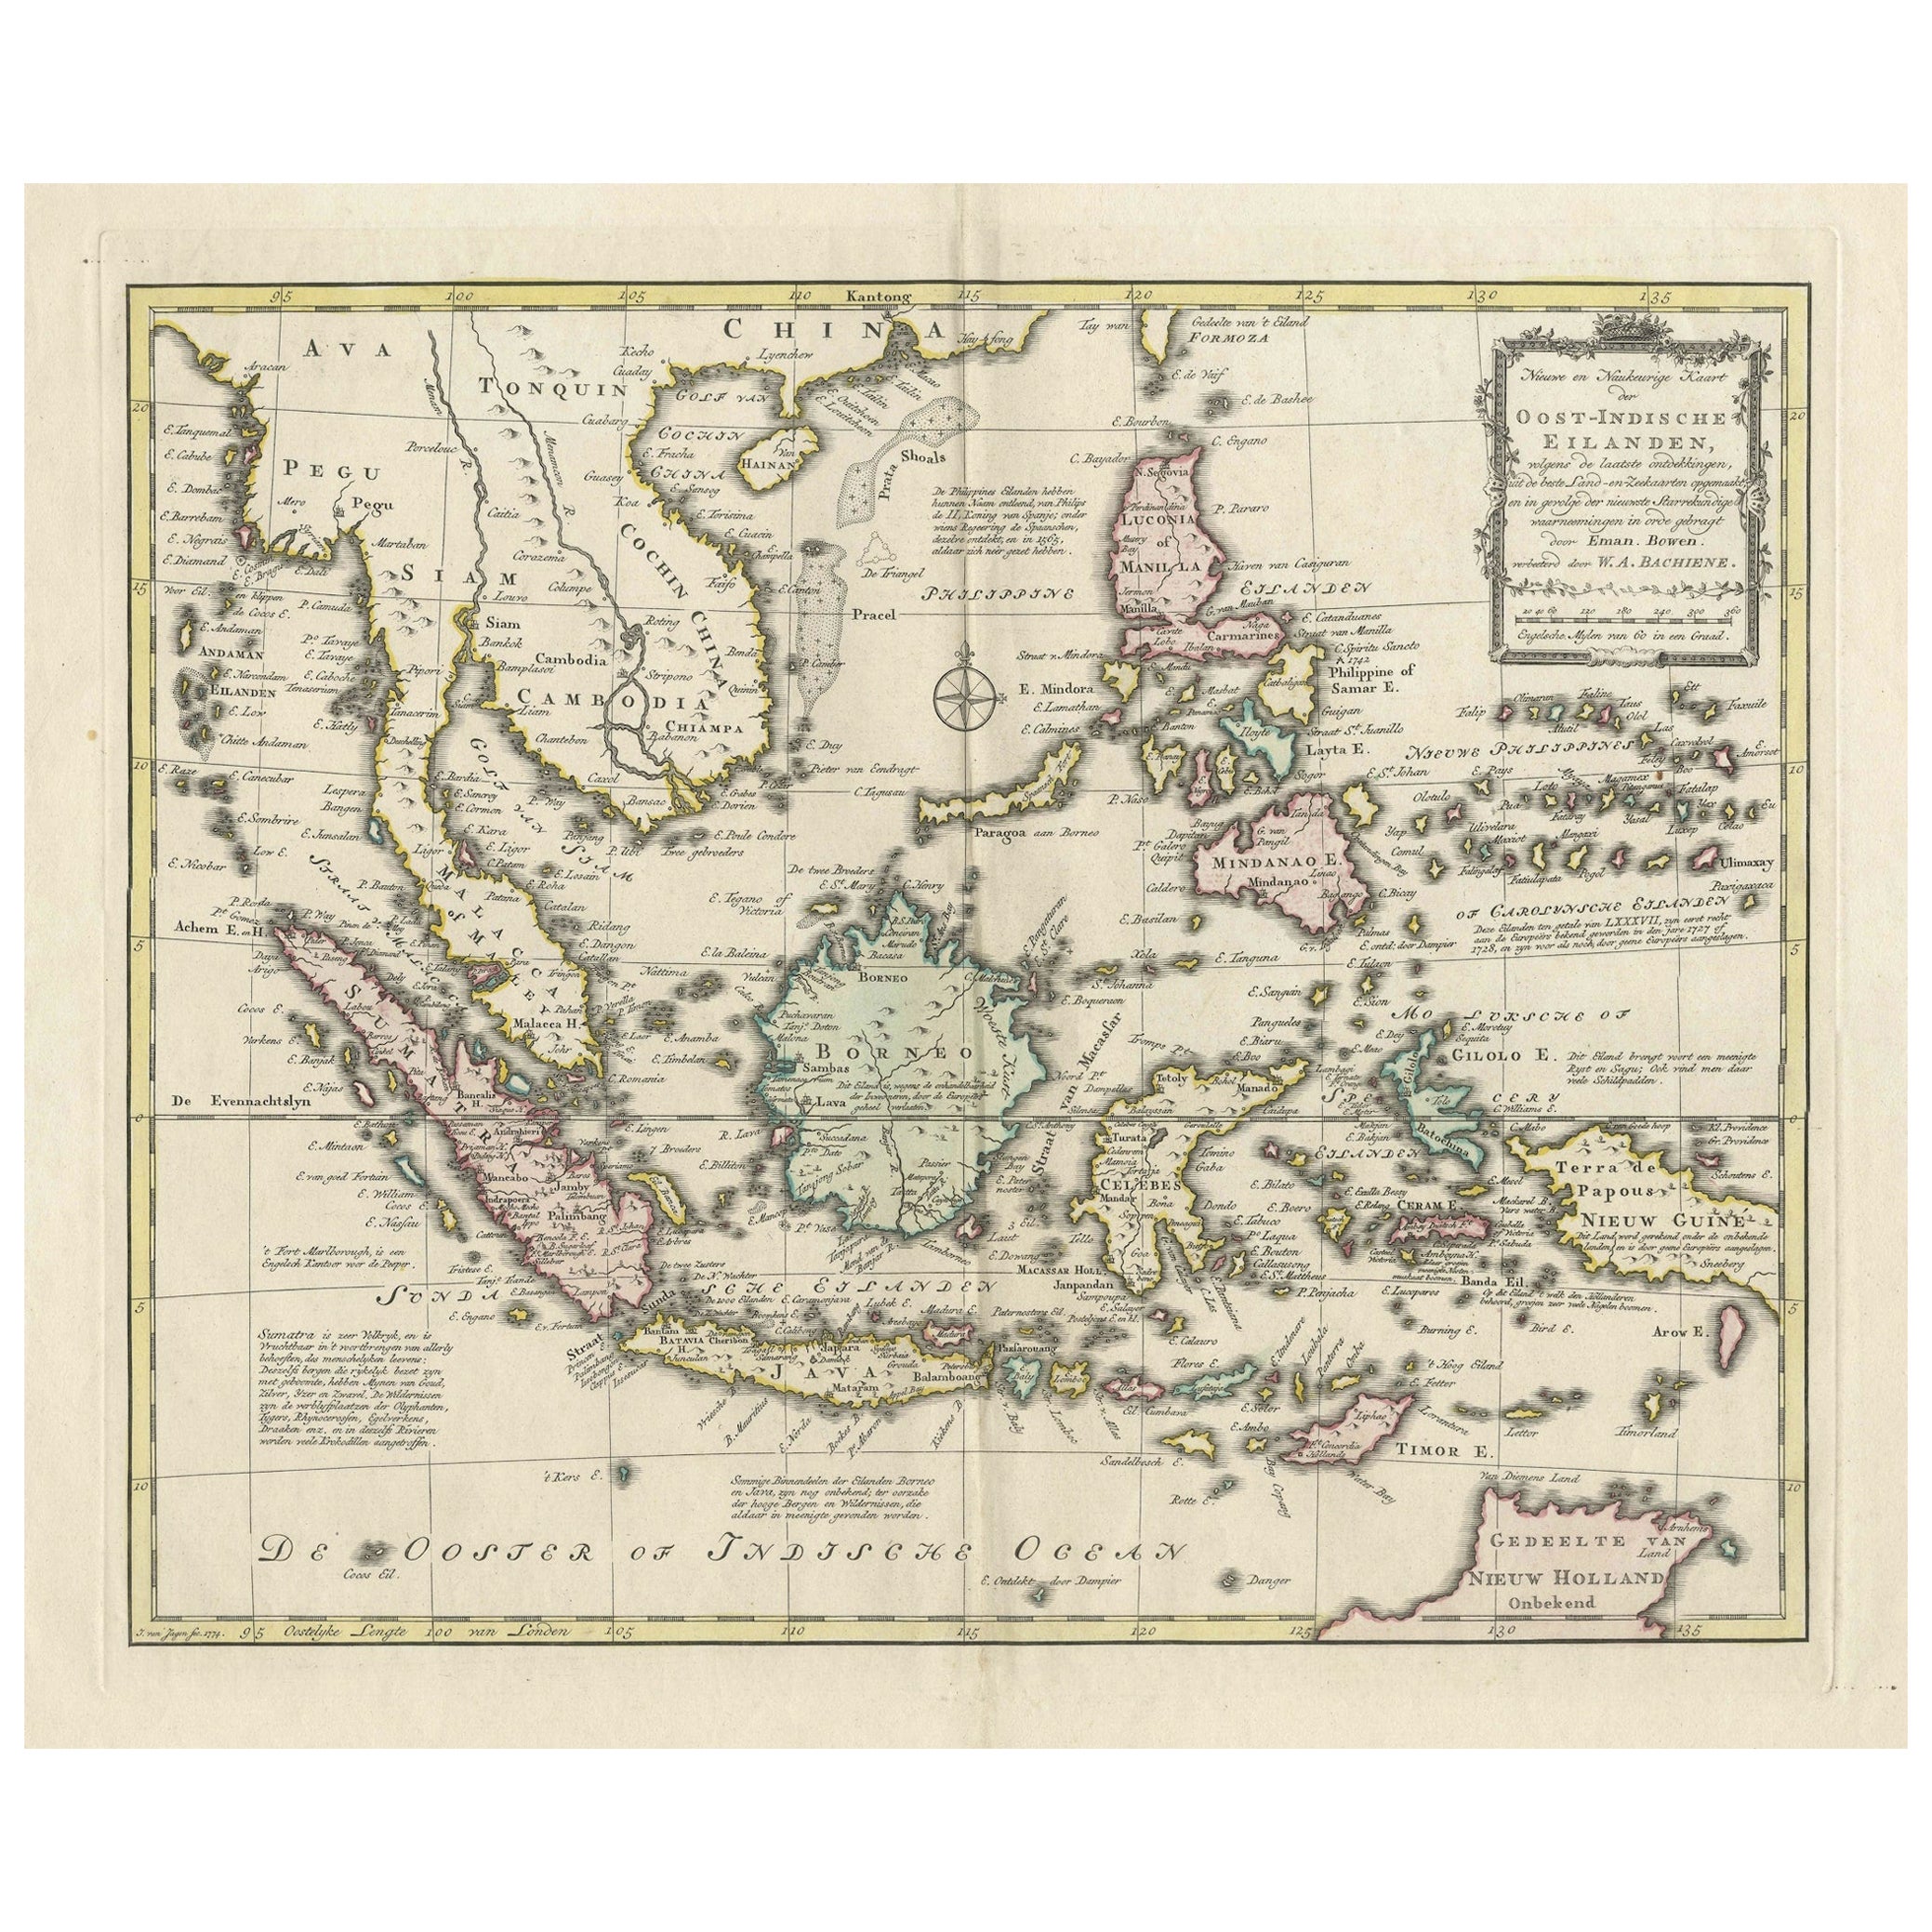 Rare Antique Map of the Dutch East Indies 'Indonesia', 1774